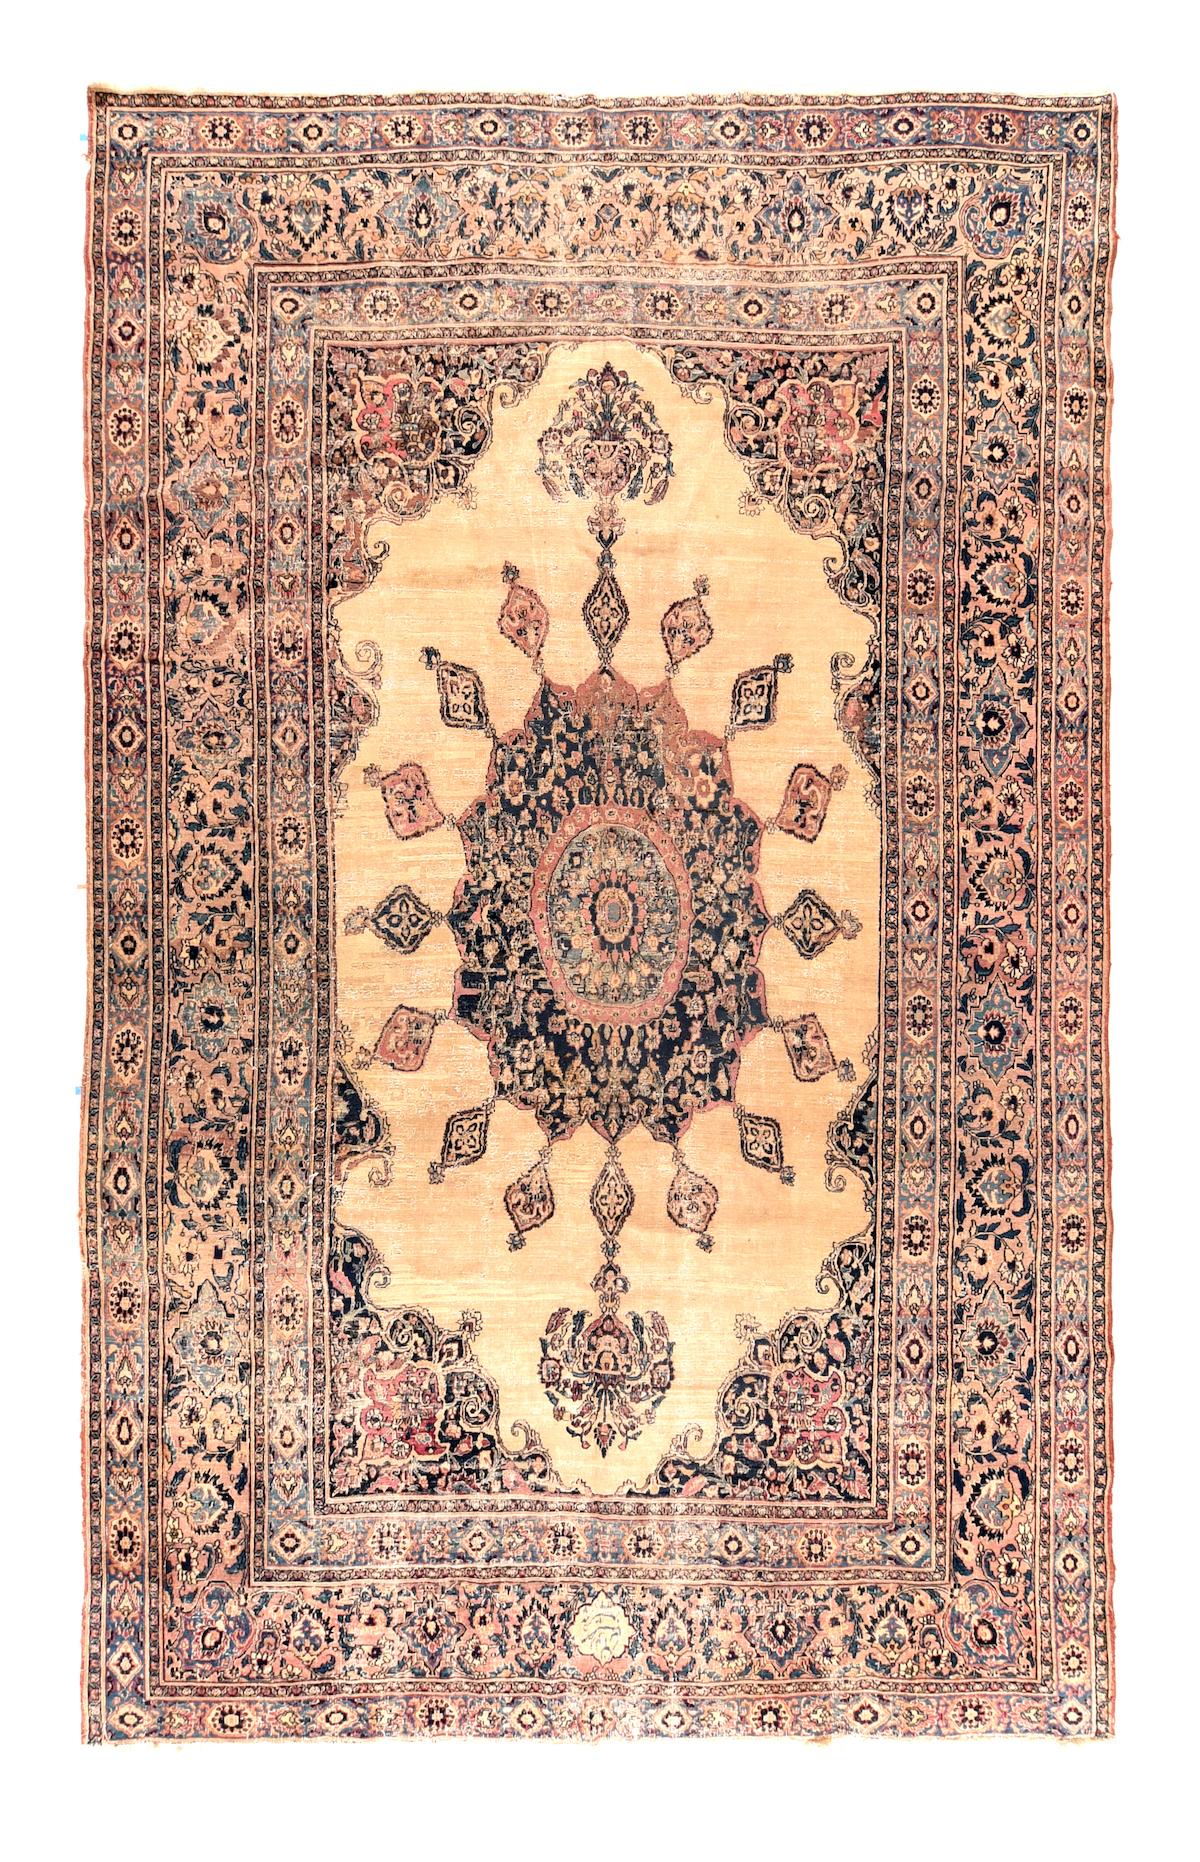 Early 20th Century Antique Khorasan Rug For Sale